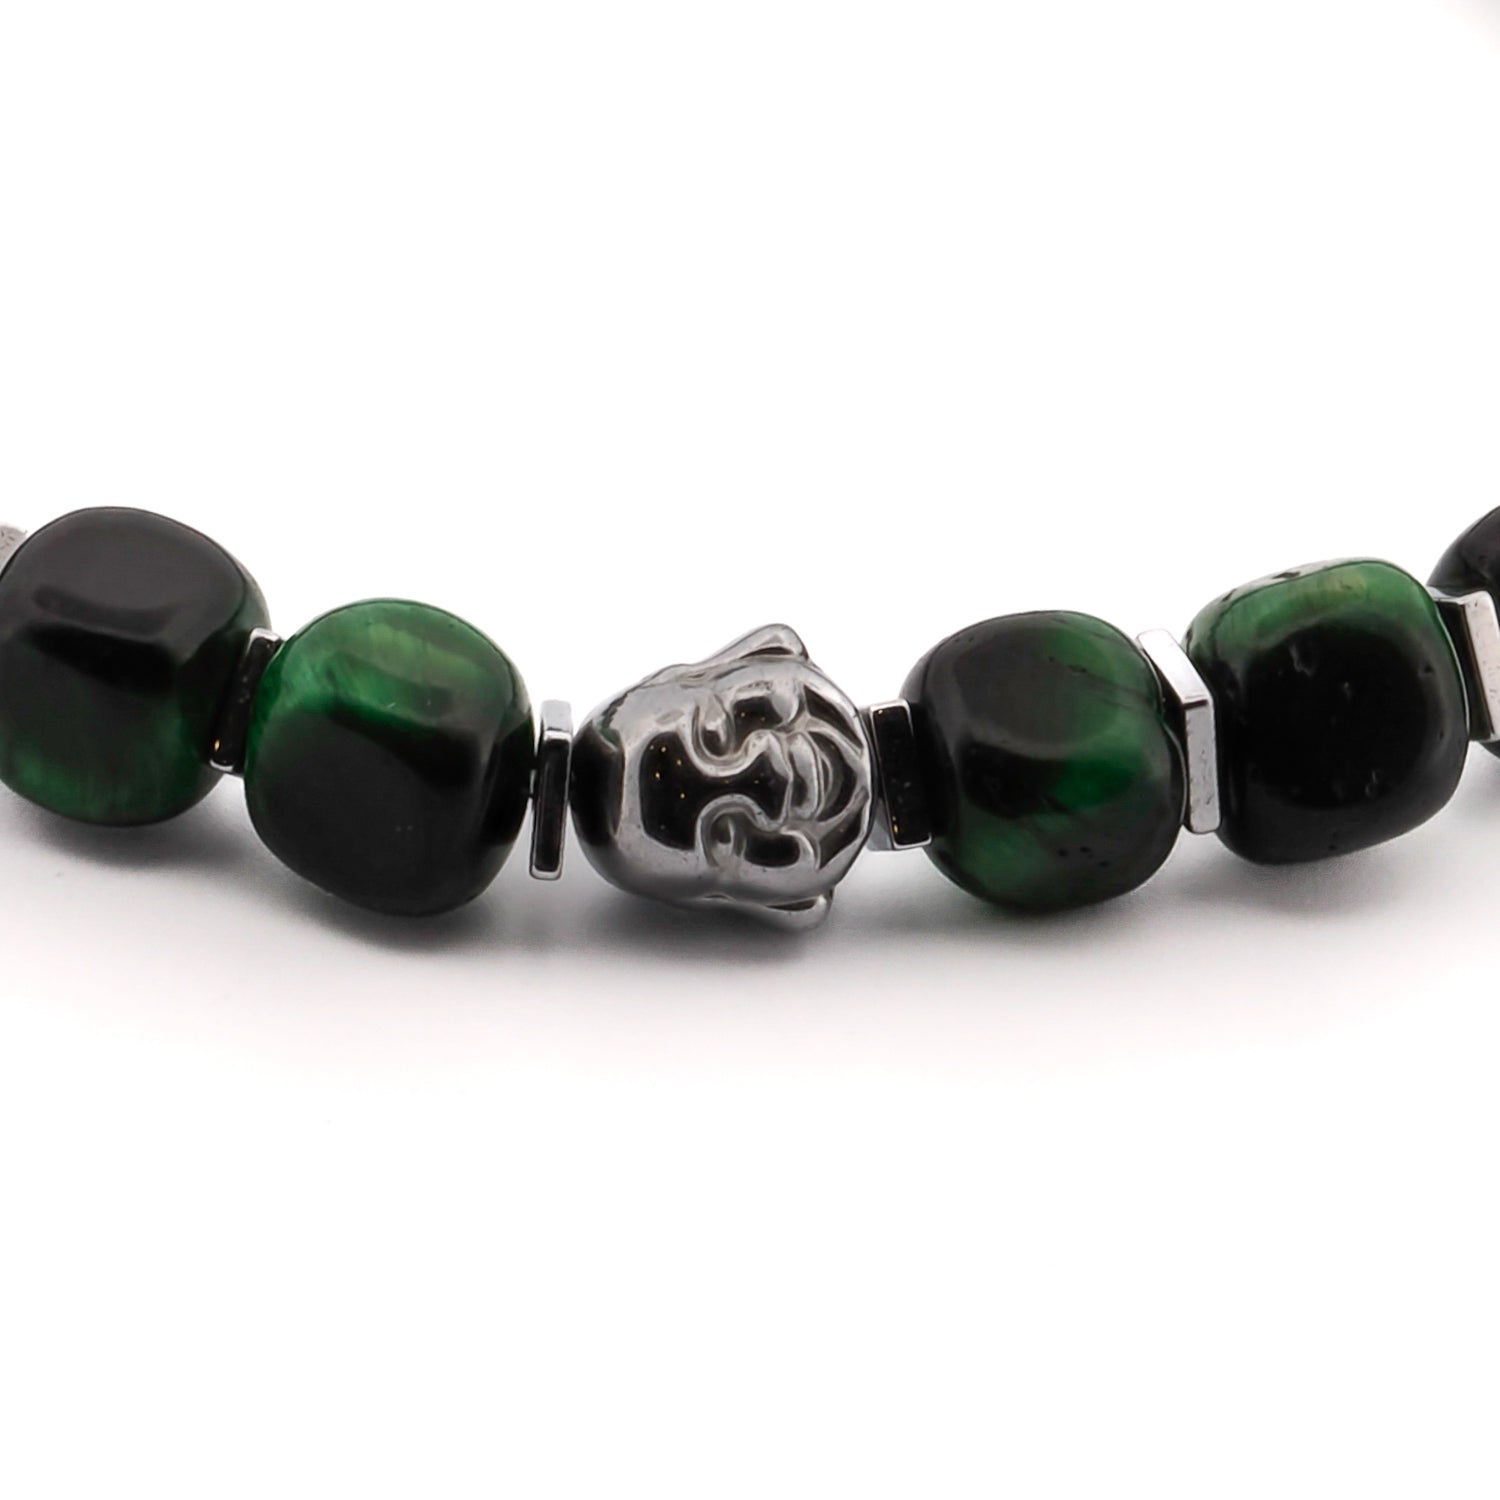 Handcrafted Green Tiger's Eye Bracelet with a Buddha bead, designed for protection and spiritual wisdom